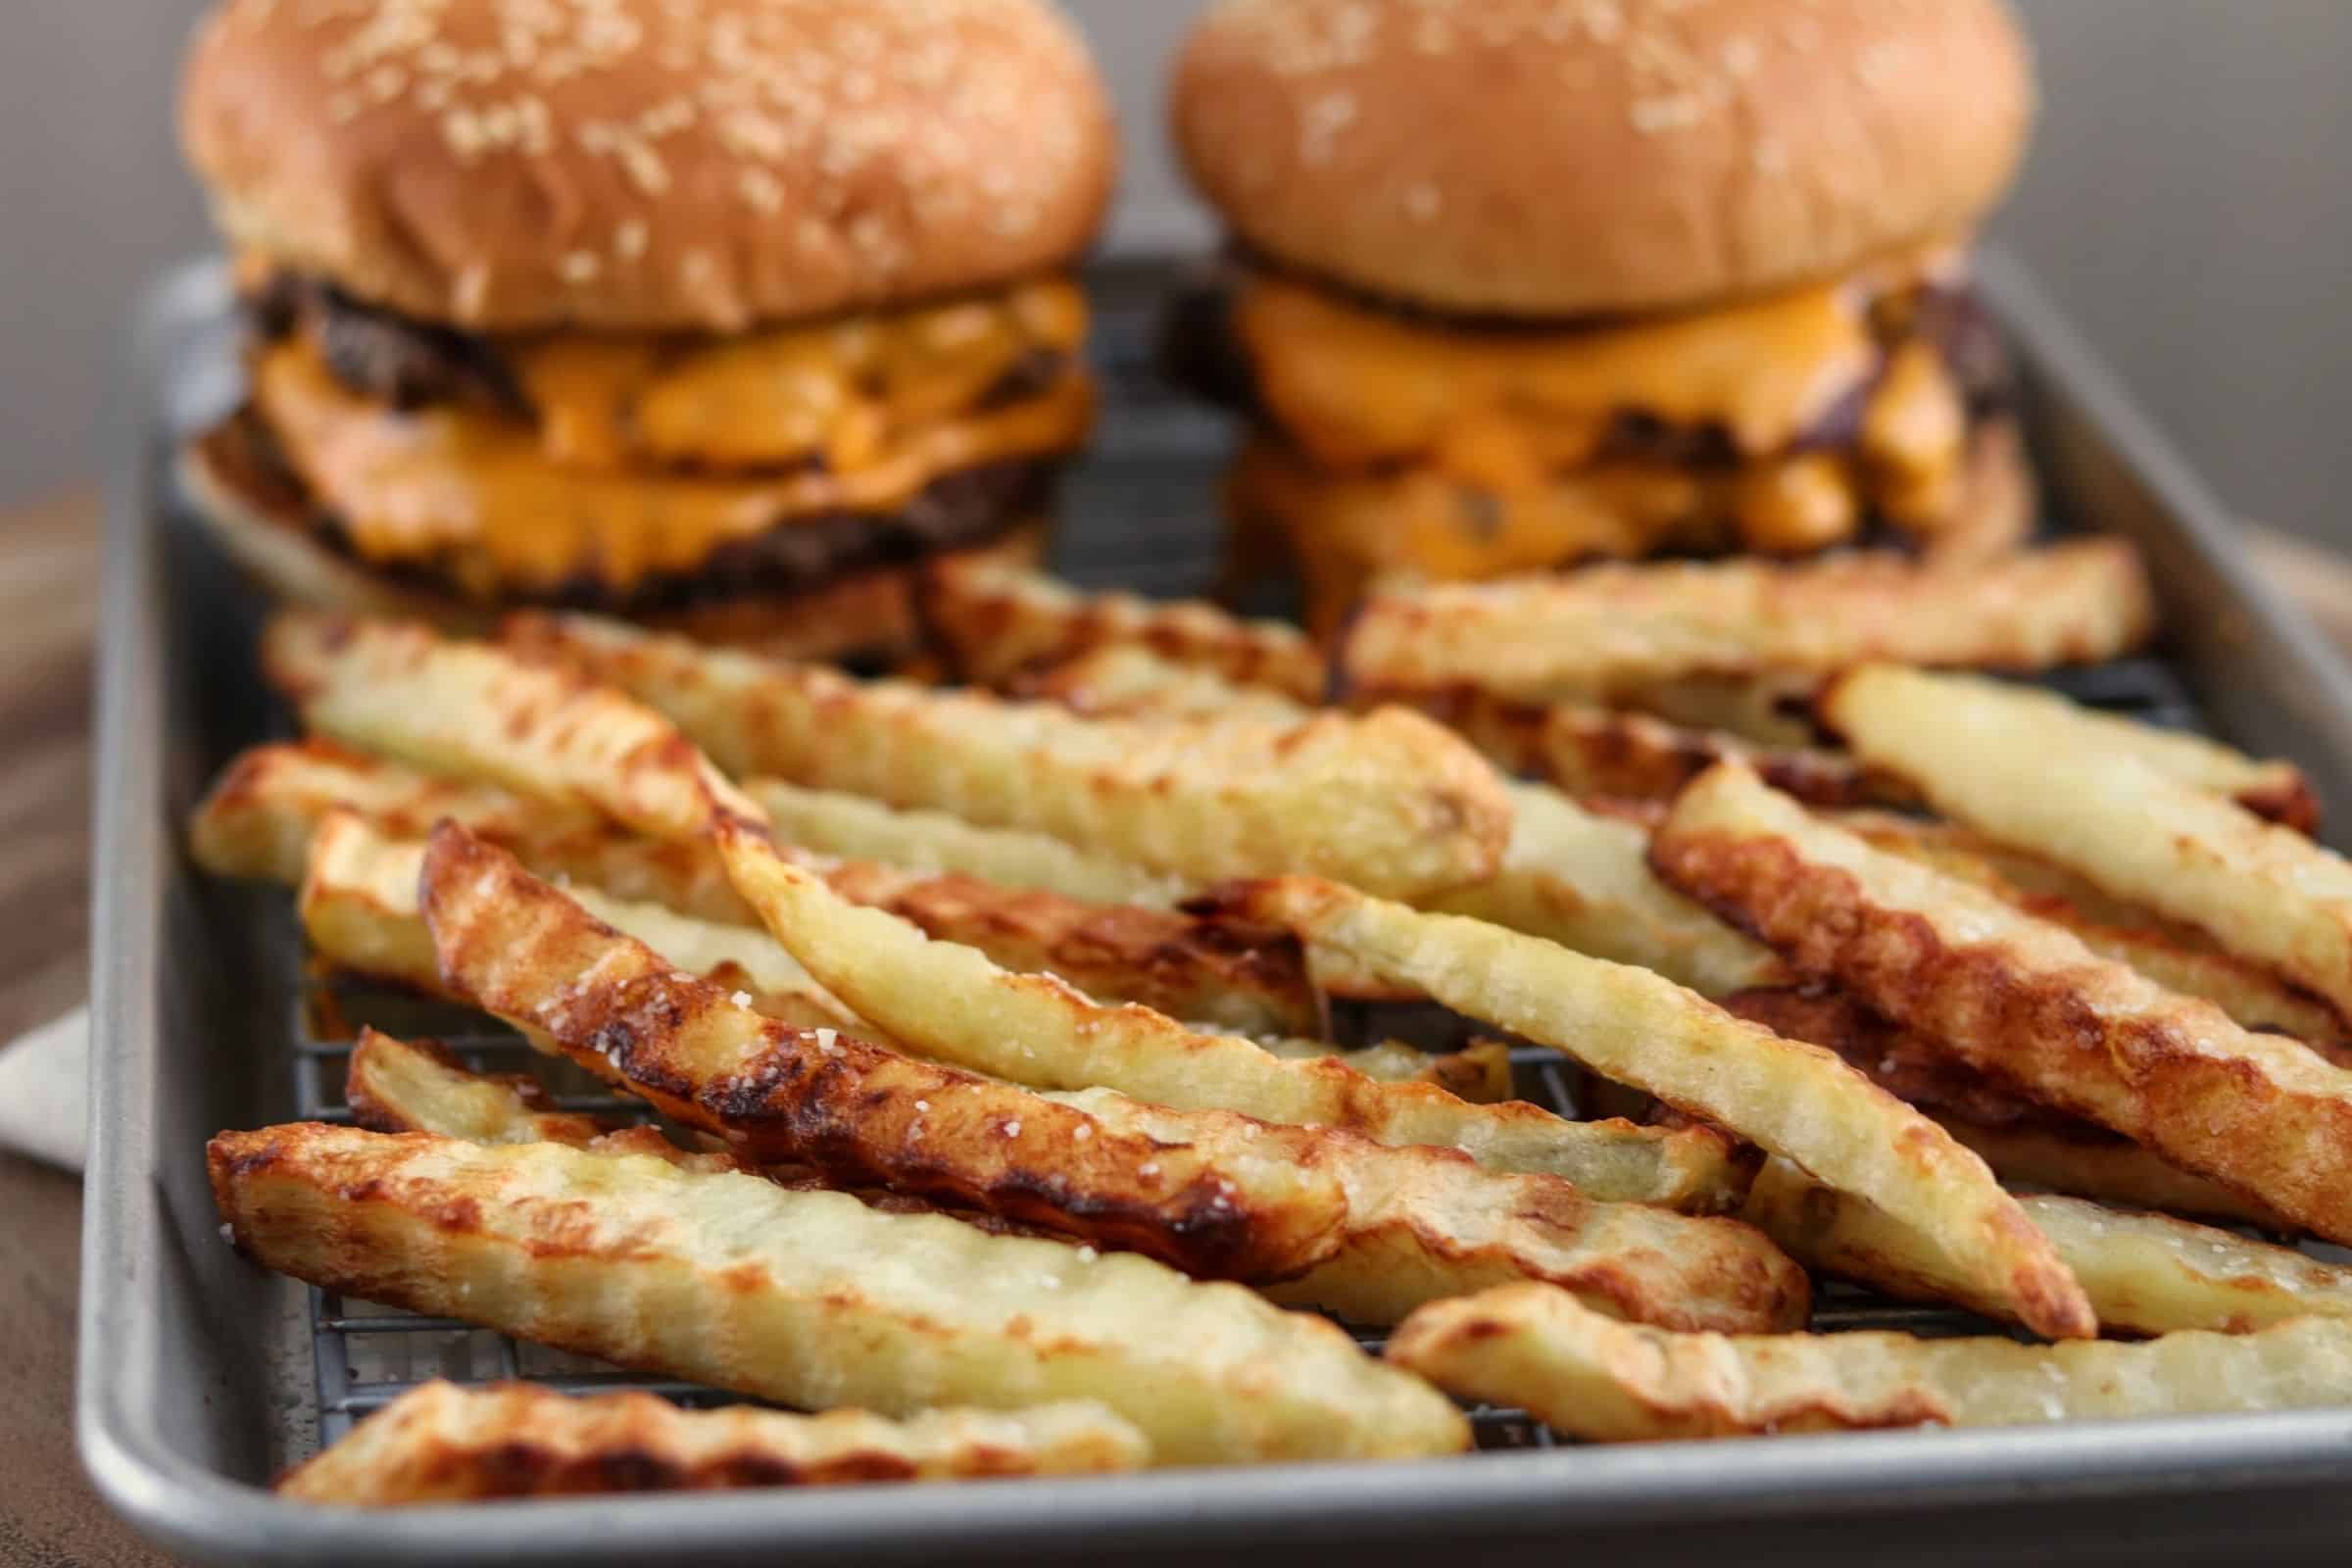 How to Make Crinkle Cut Fries in an Air Fryer or Oven